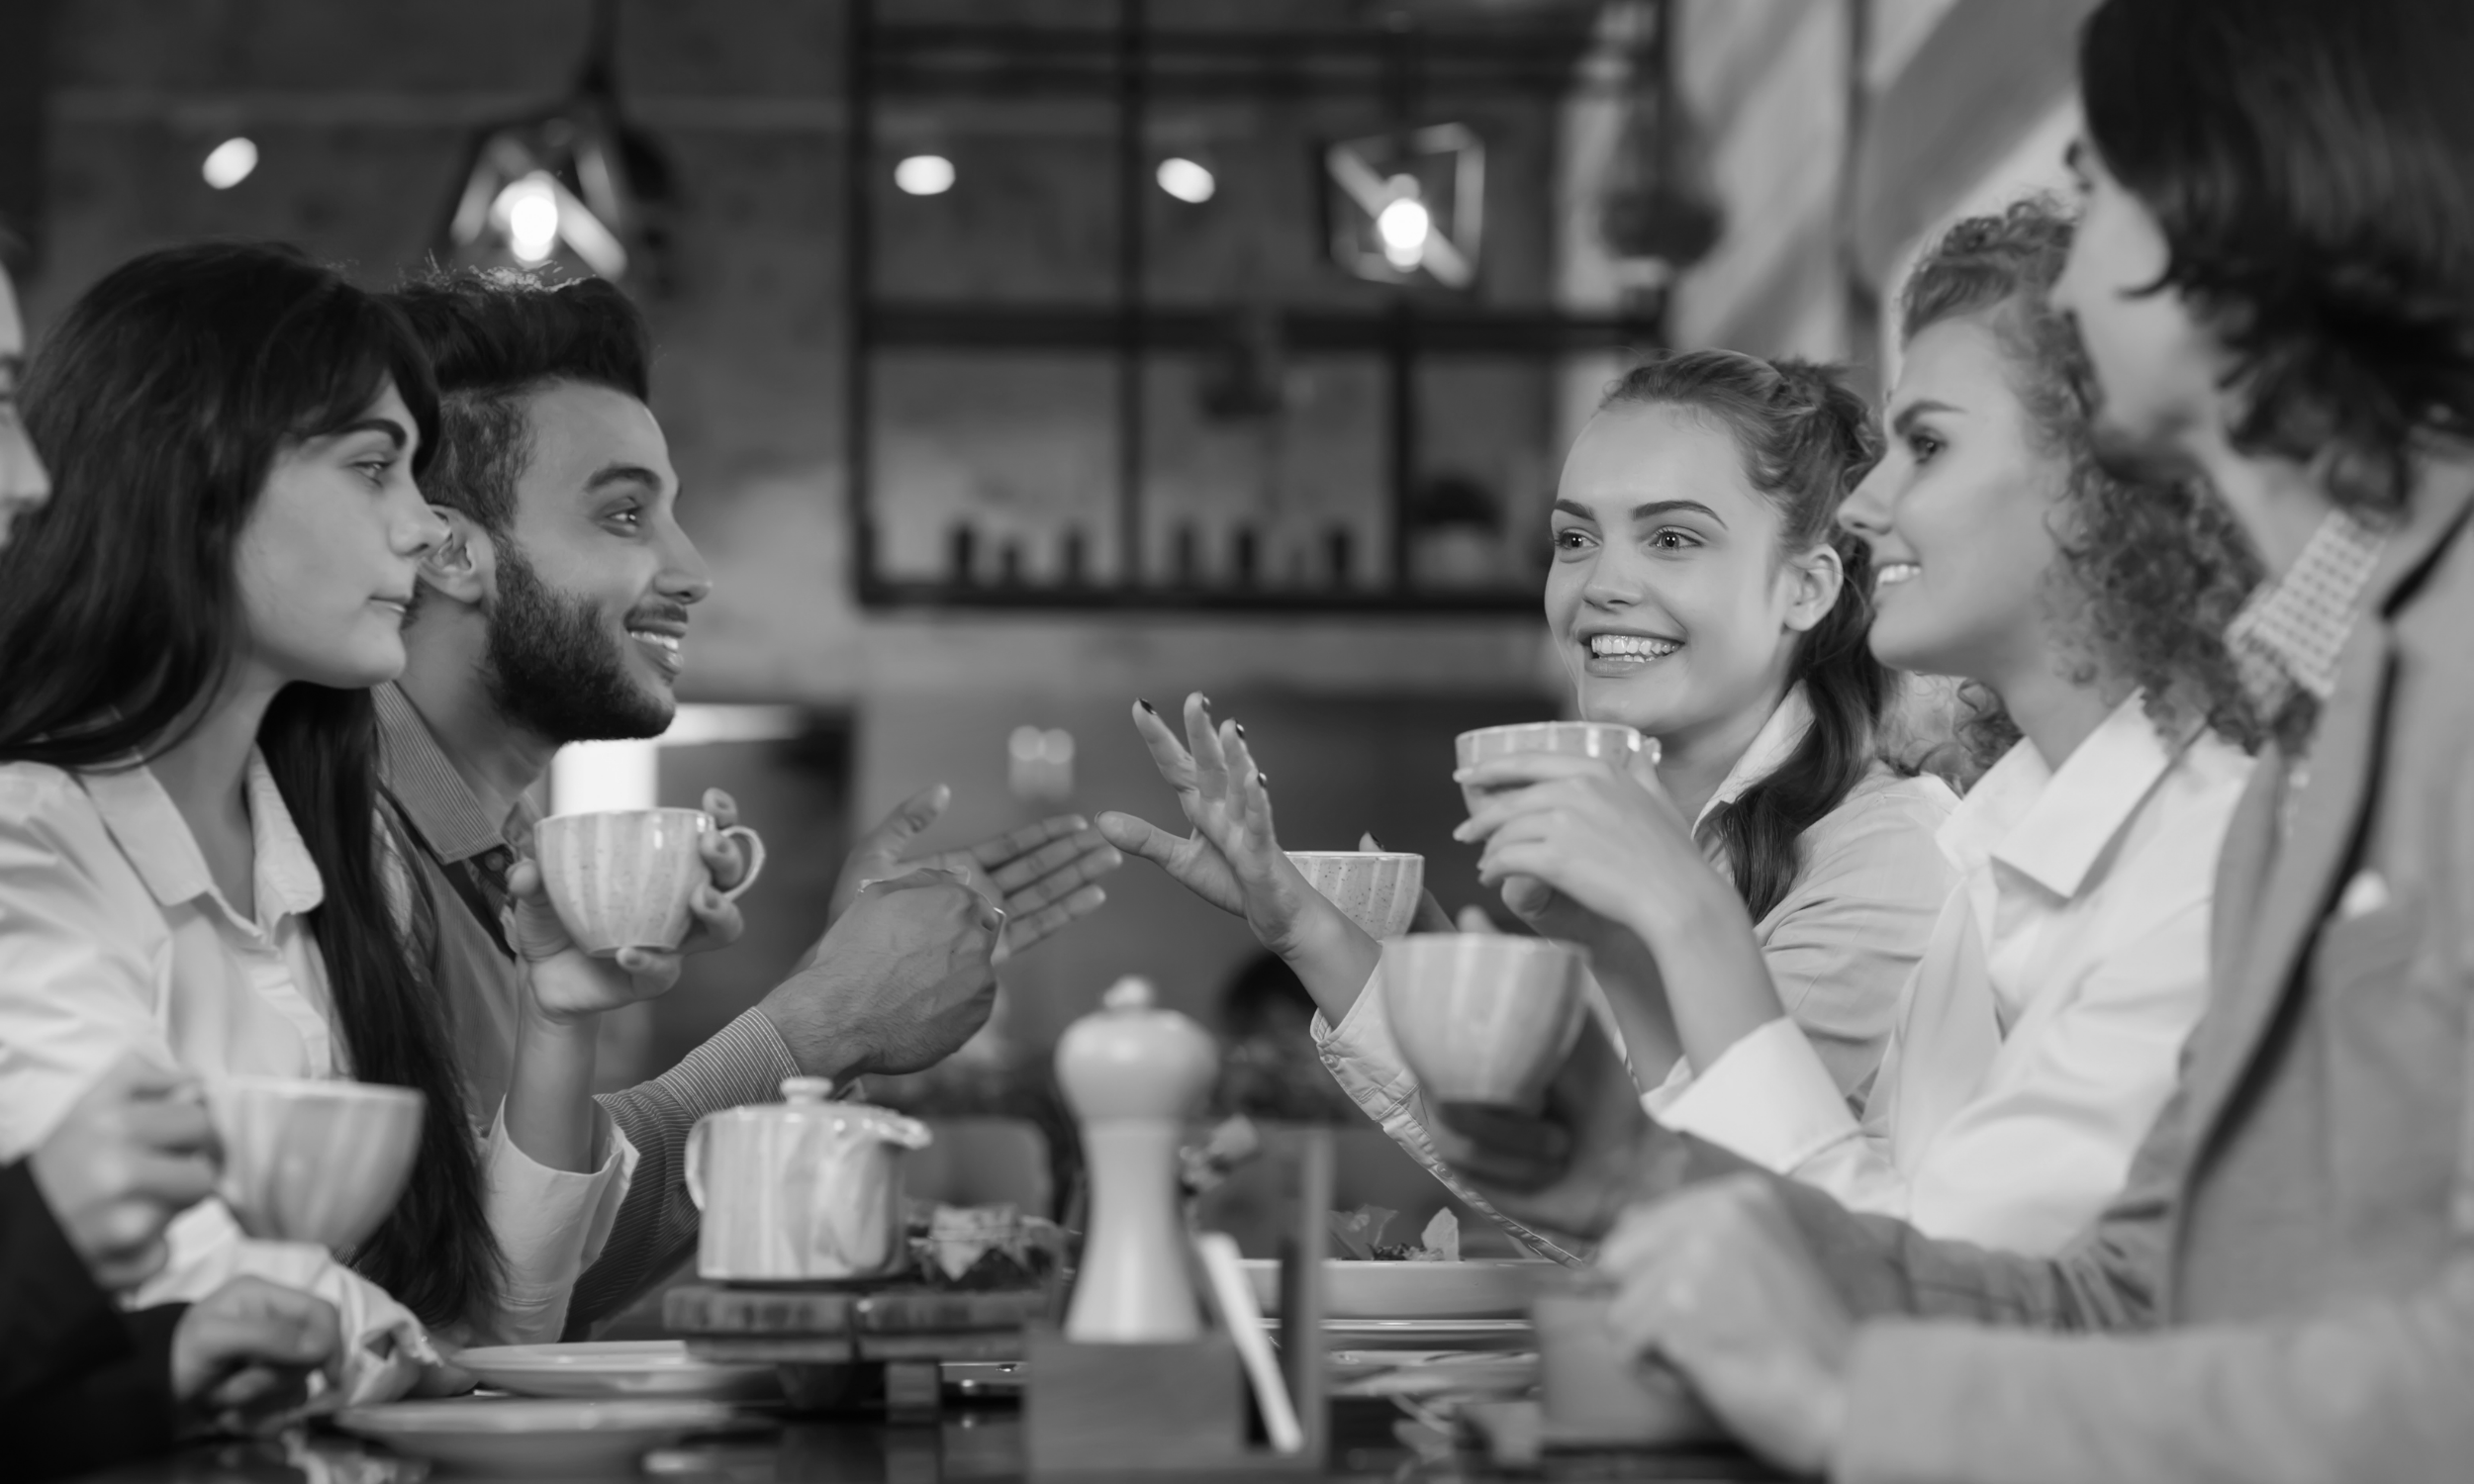 Group of people drinking coffee together